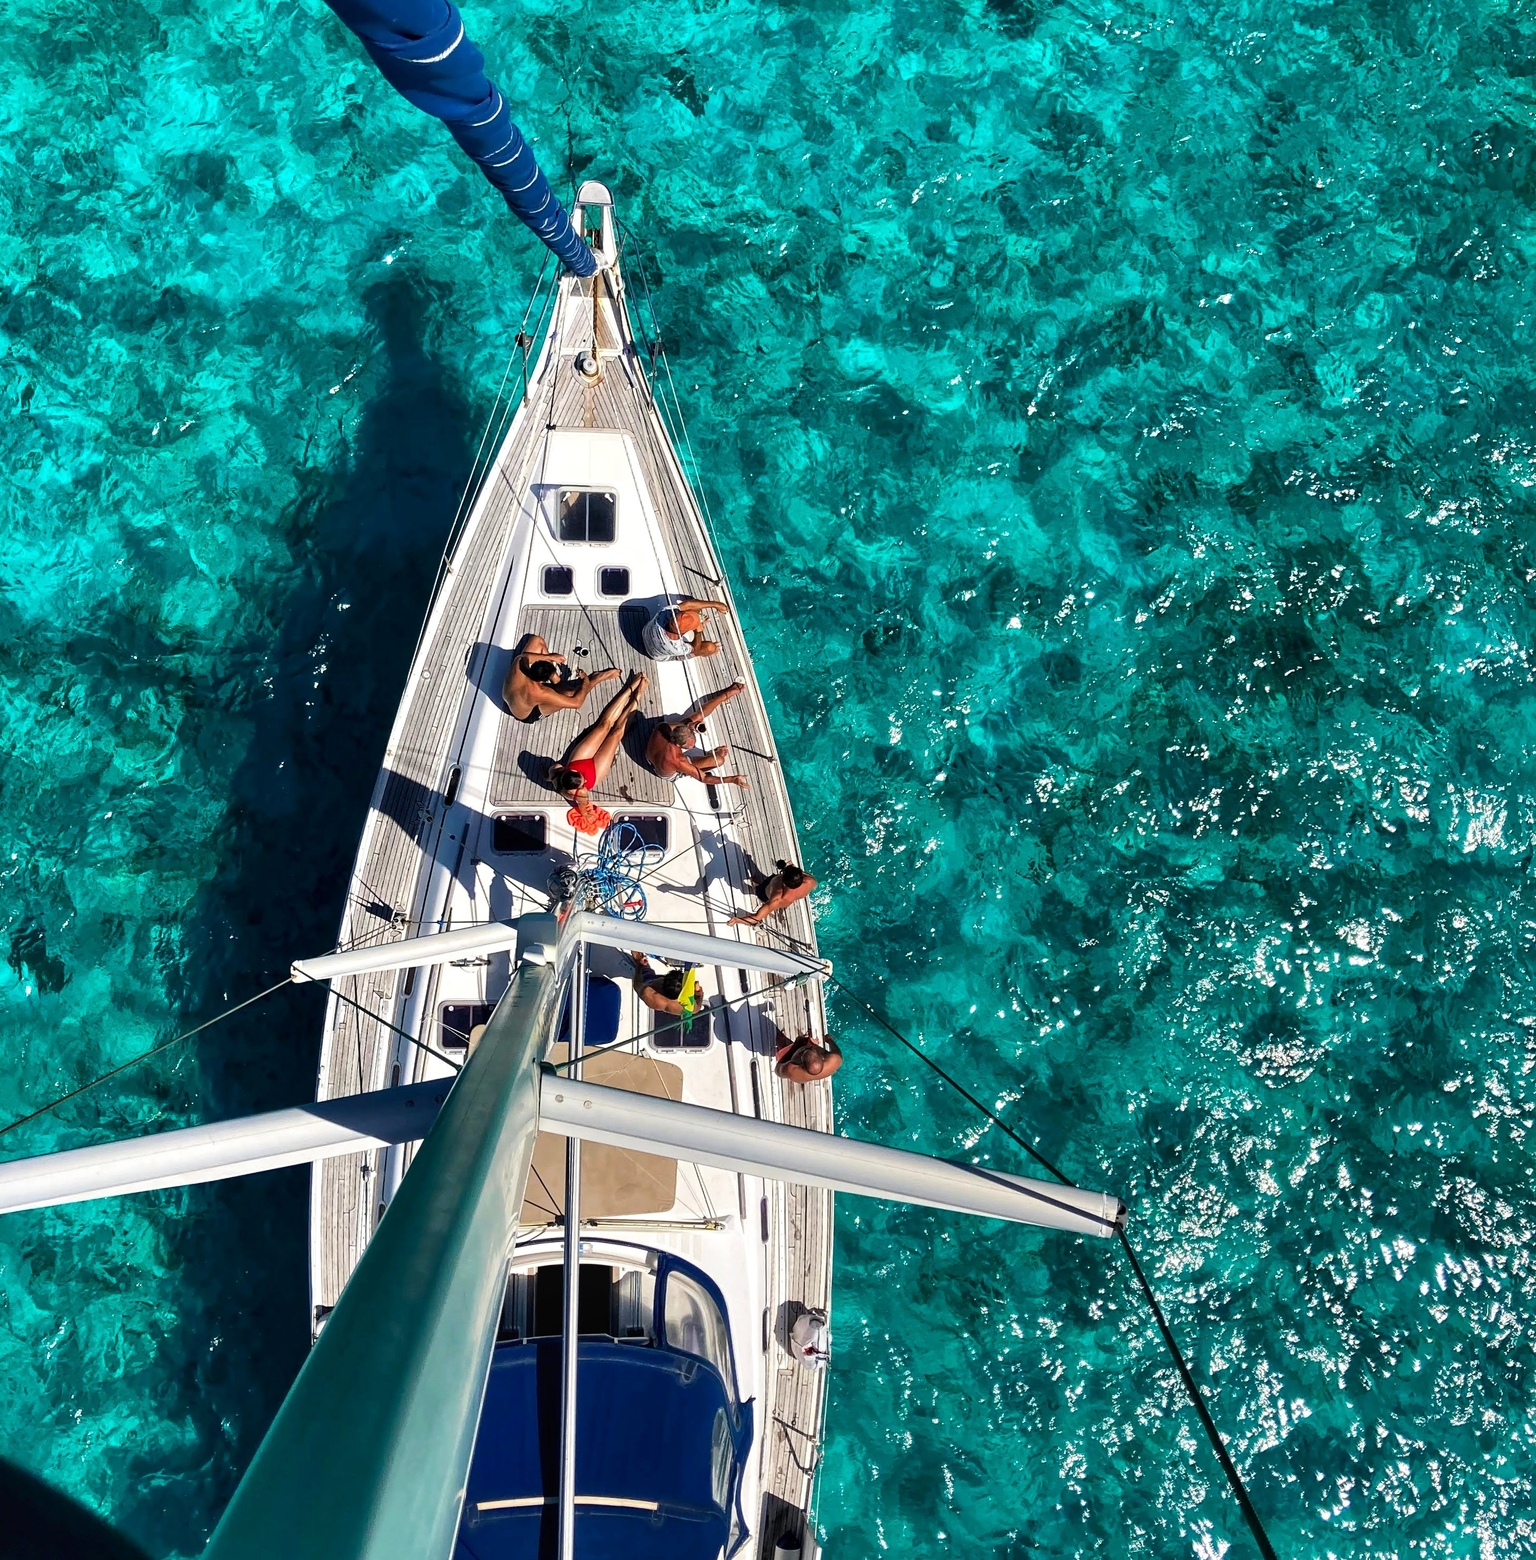 A photo taken from above, the top of the sailboat’s mass. It shows a group of friends laying on the deck, with crystal clear blue water around them.